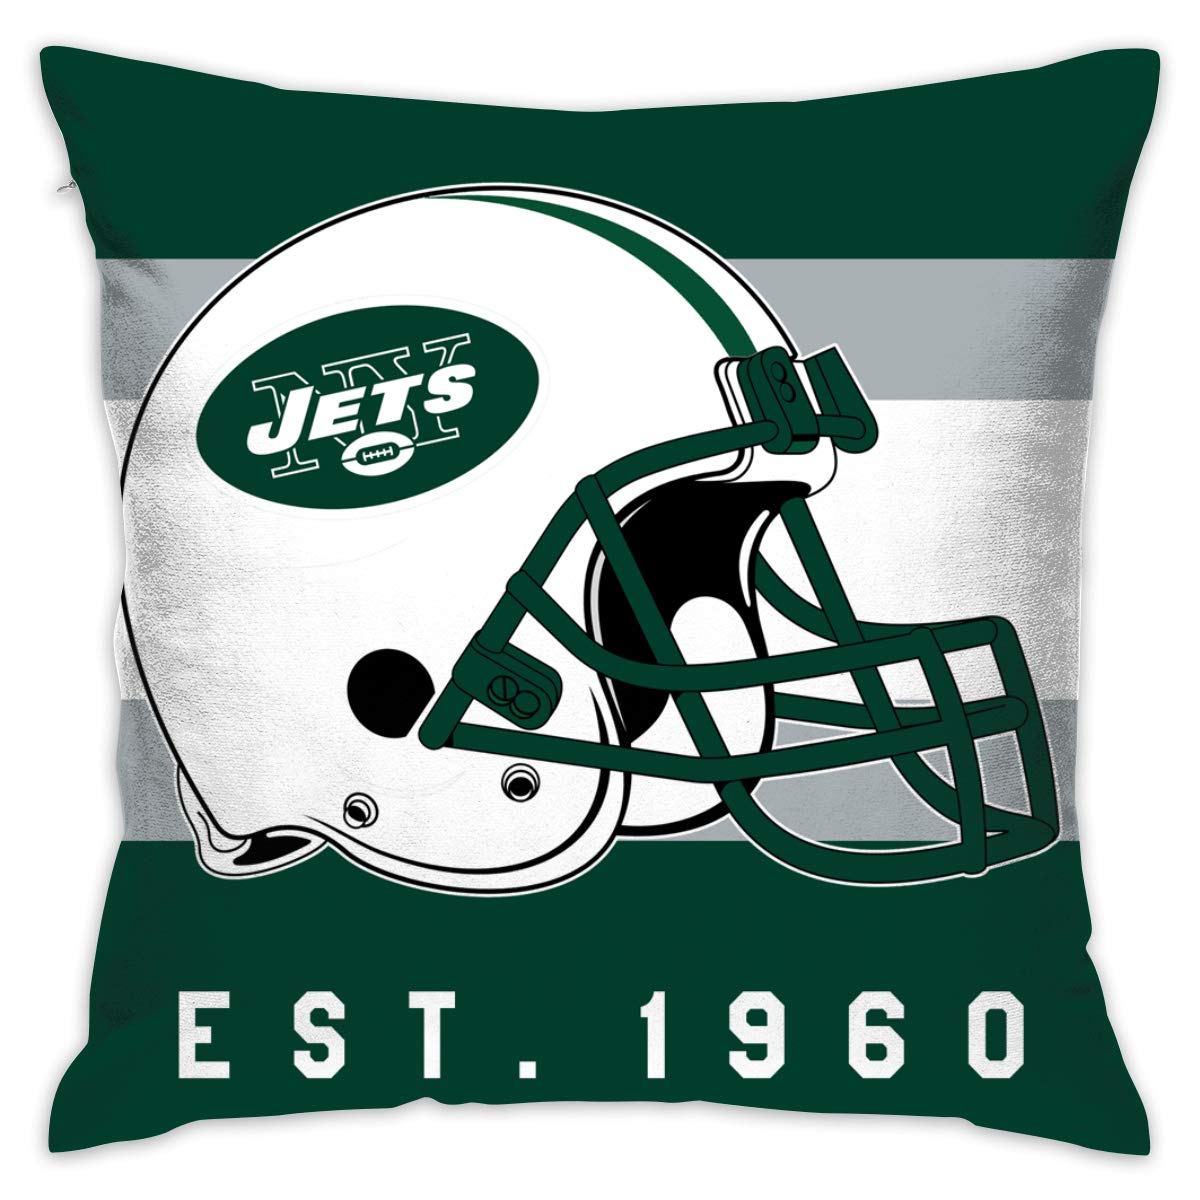 Personalized Football New York Jets Design Pillowcase Decorative Throw Pillow Cover